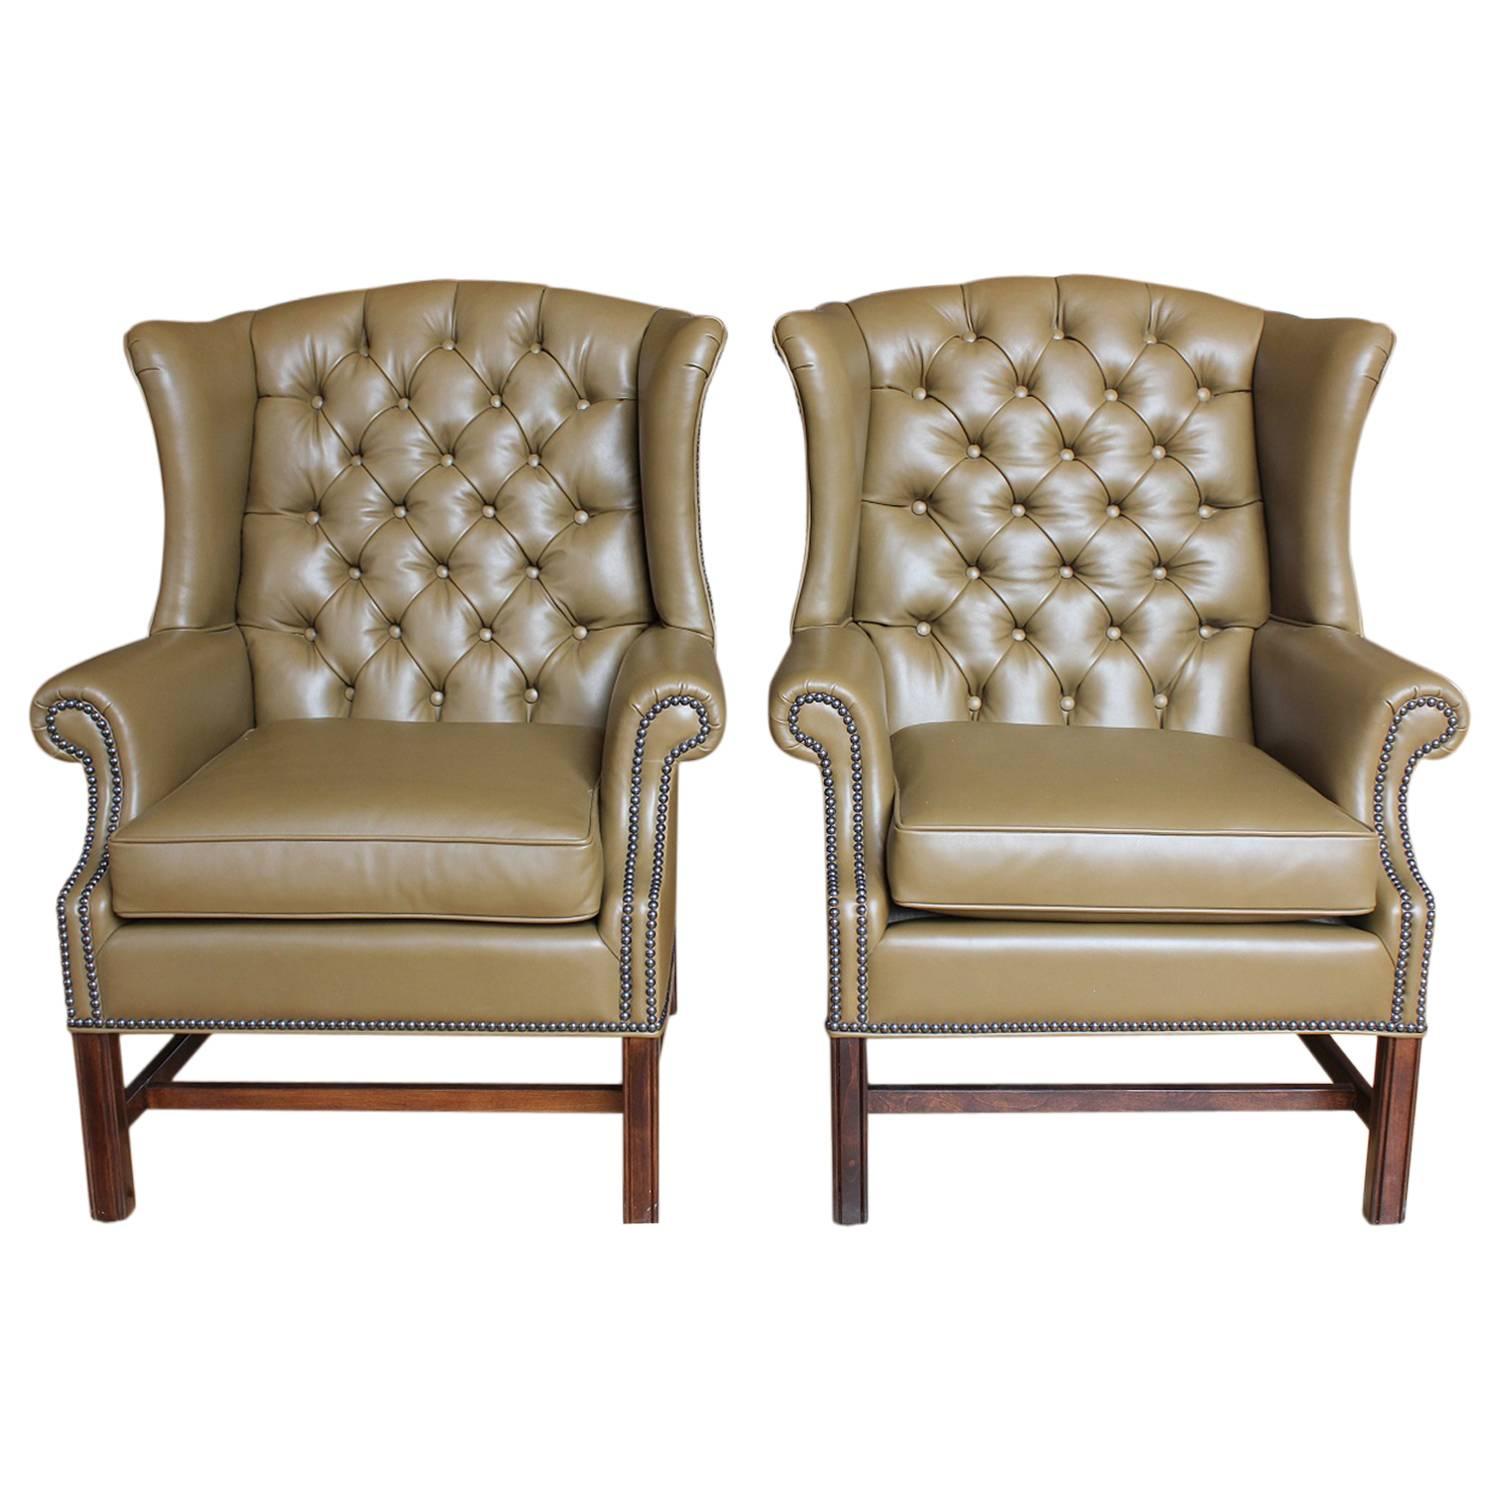 1920s American Library Tufted Leather Wing Chair For Sale